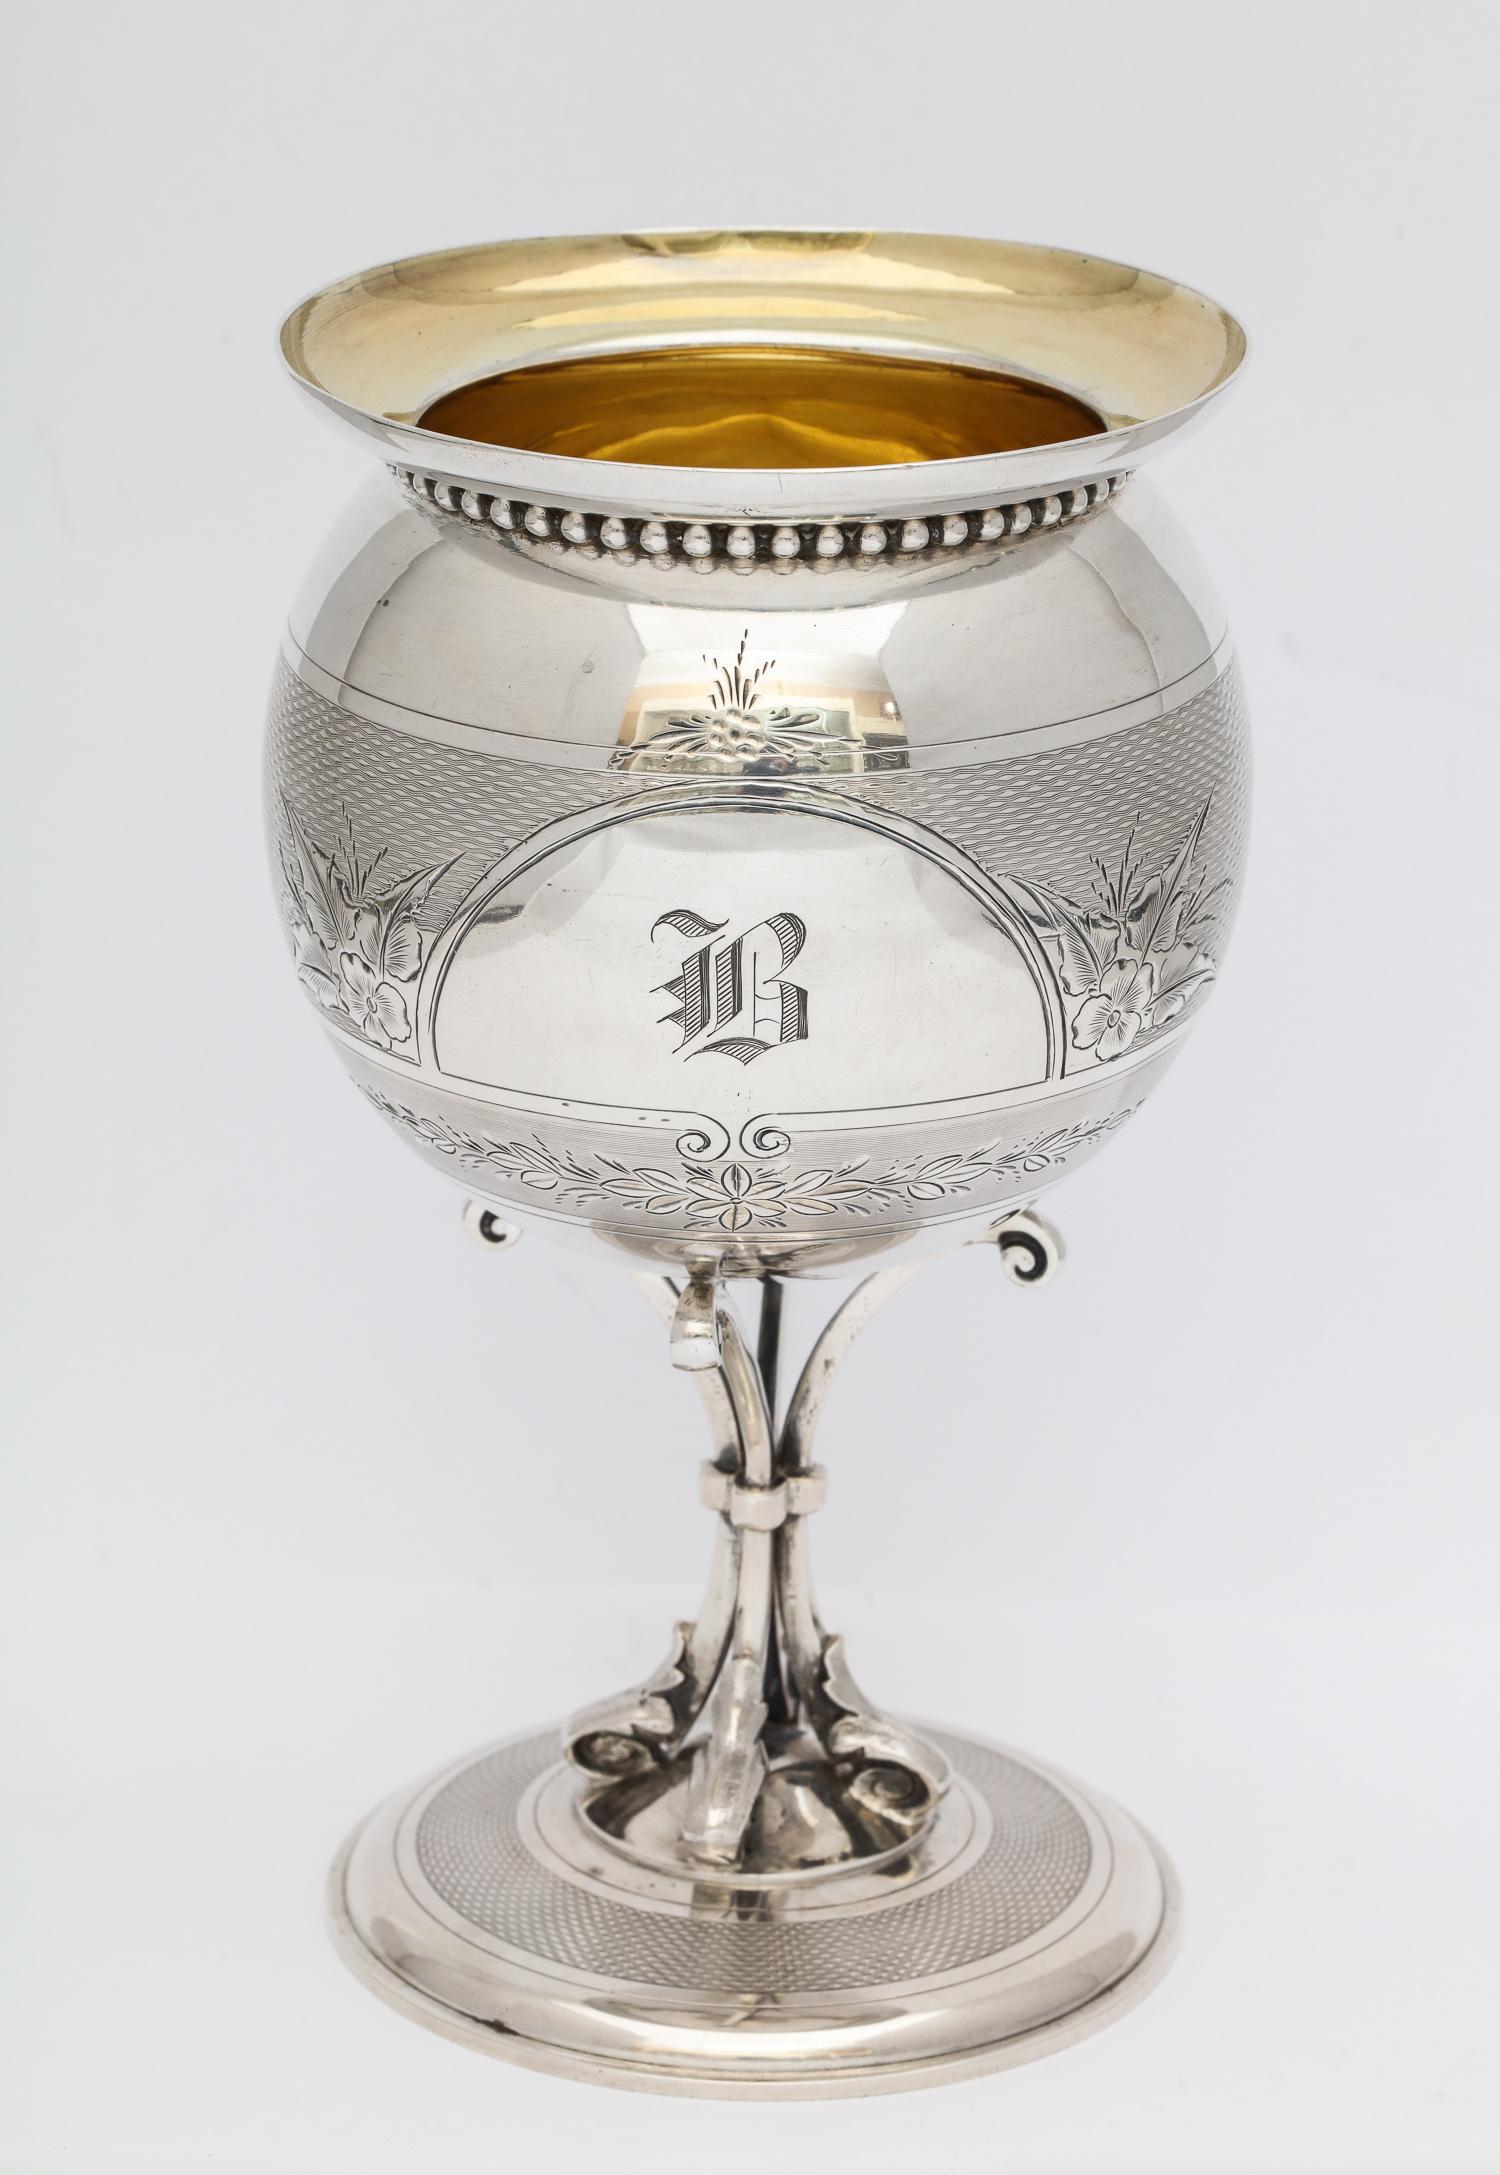 American, neoclassical coin silver vase, Gorham Mfg. Co., Providence, Rhode Island, circa 1865. Gilded interior. Applied beading under the upper rim. Monogrammed with an Old English letter B. Engine turned design. Measures 6 1/4 inches high x 3 1/2